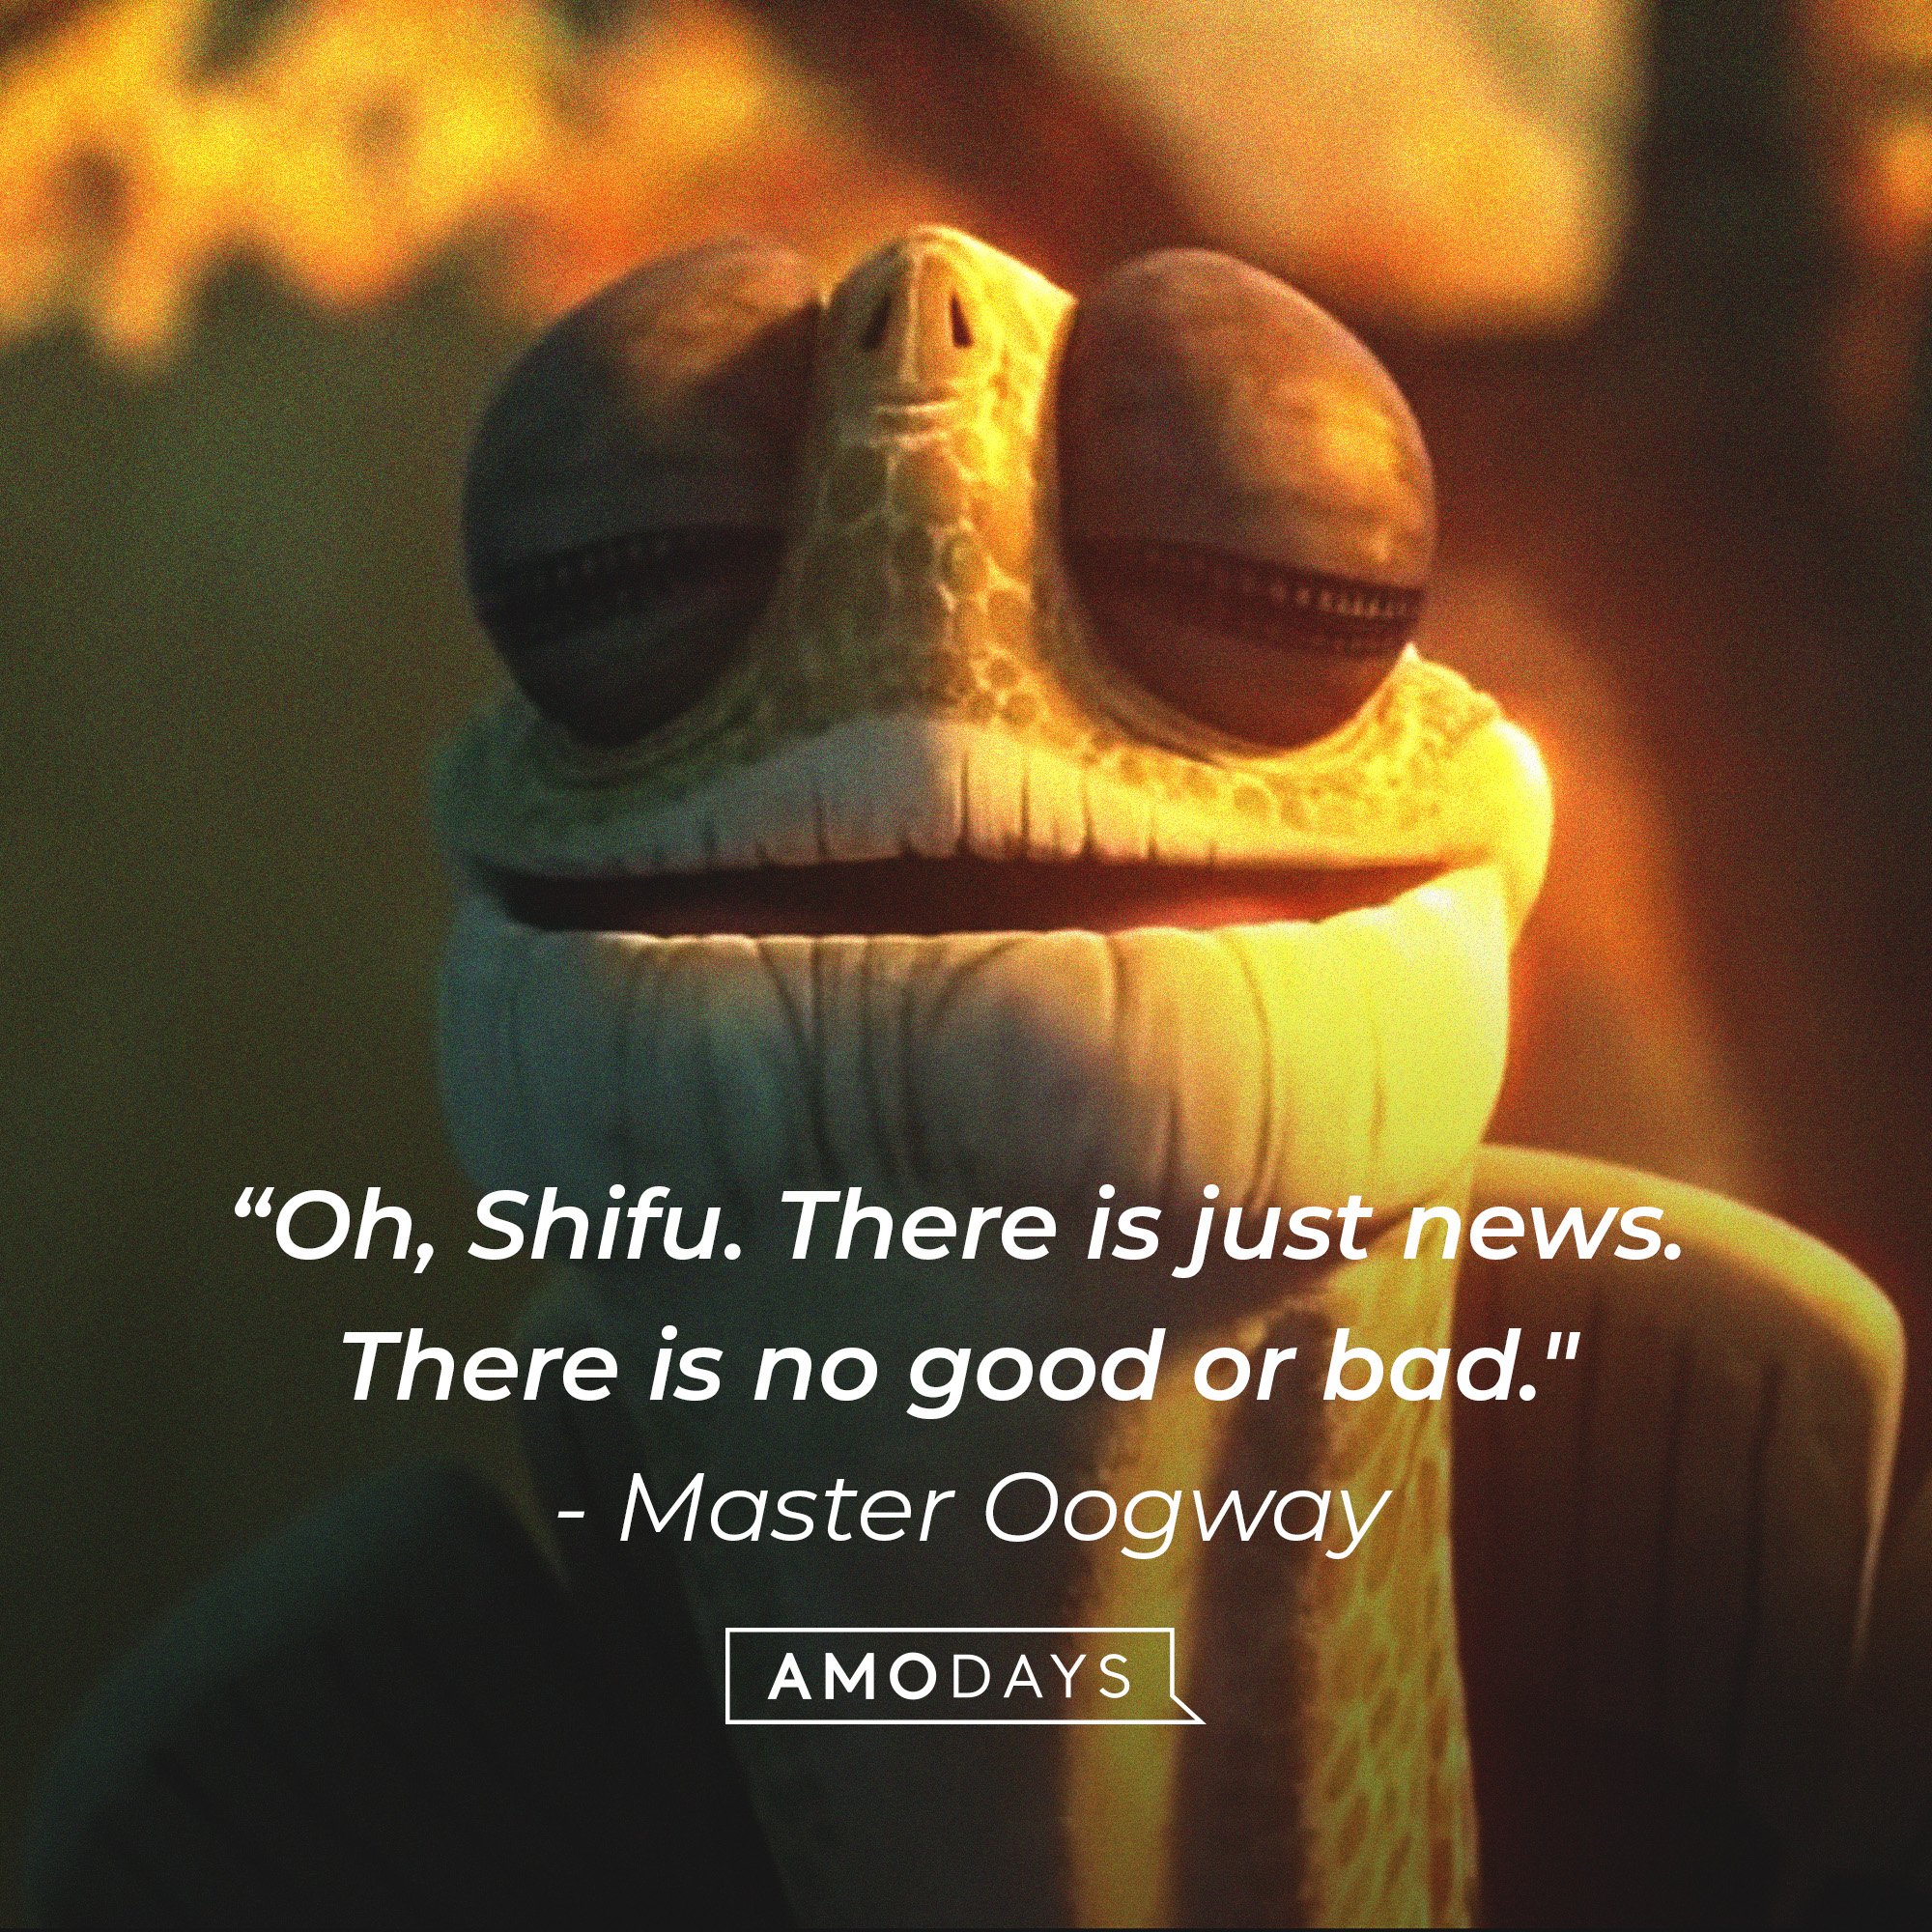 Master Oogway’s quote: “Oh, Shifu. There is just news. There is no good or bad."  | Image: AmoDays